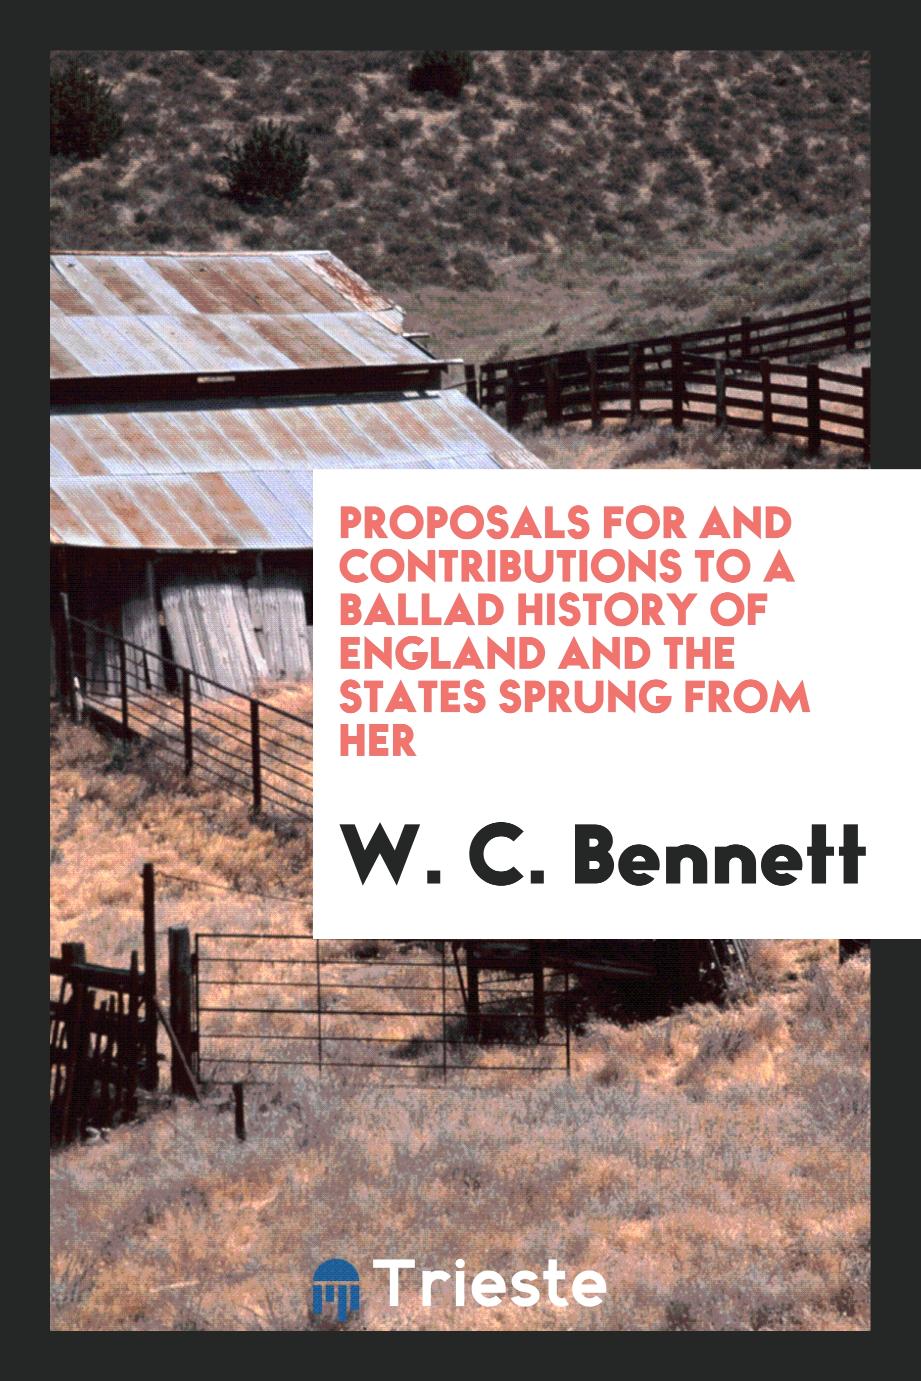 Proposals for and Contributions to a Ballad History of England and the States Sprung from Her